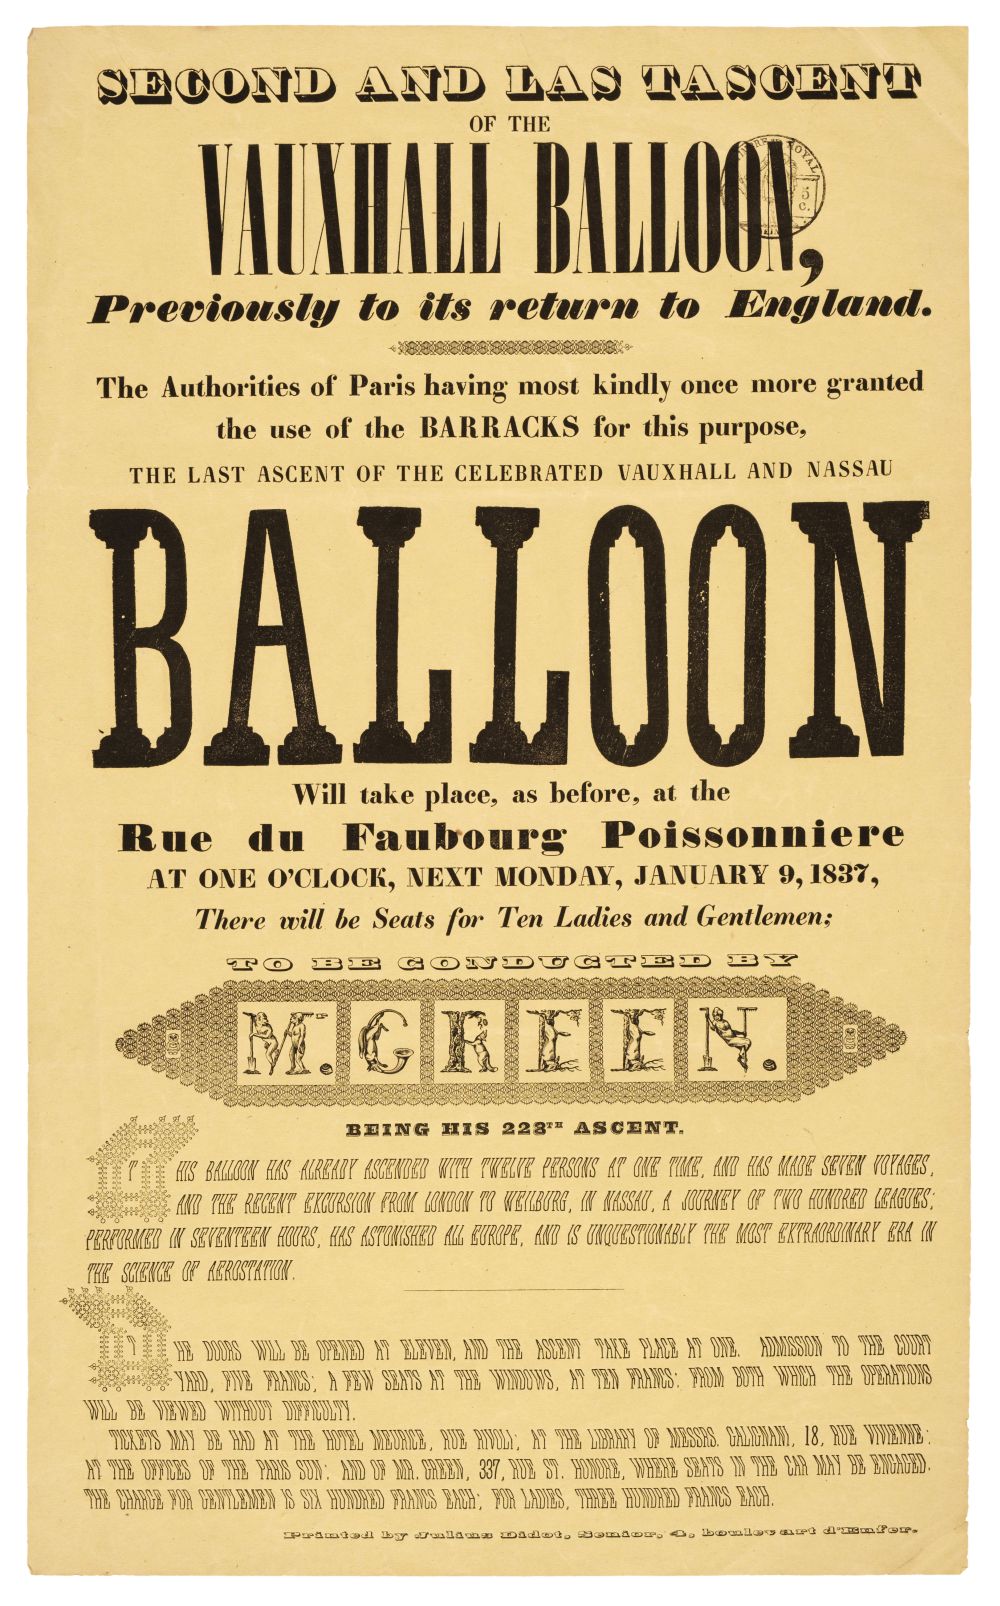 Ballooning Broadsides. Second and Last Ascent of the Vauxhall Balloon, 1837 and similar broadsides